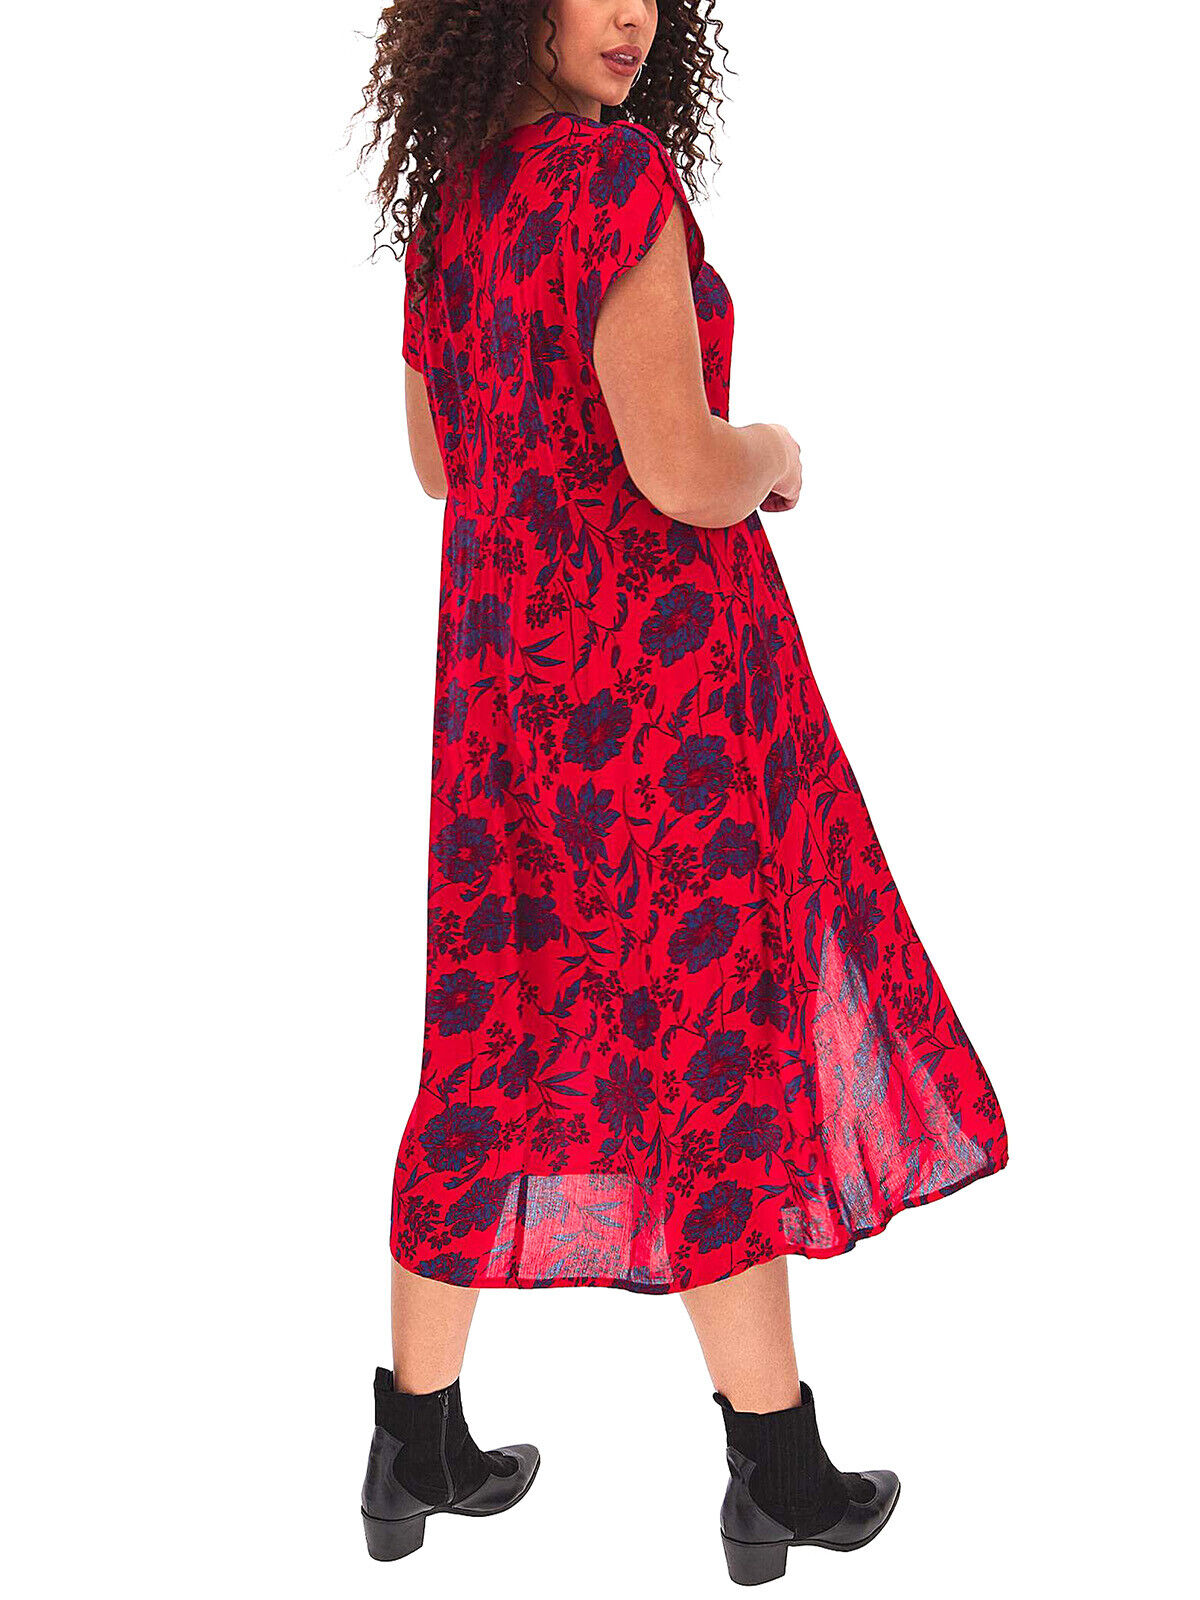 Joe Browns Red Multi Print All New Summer Sizzling Dress in Size 32